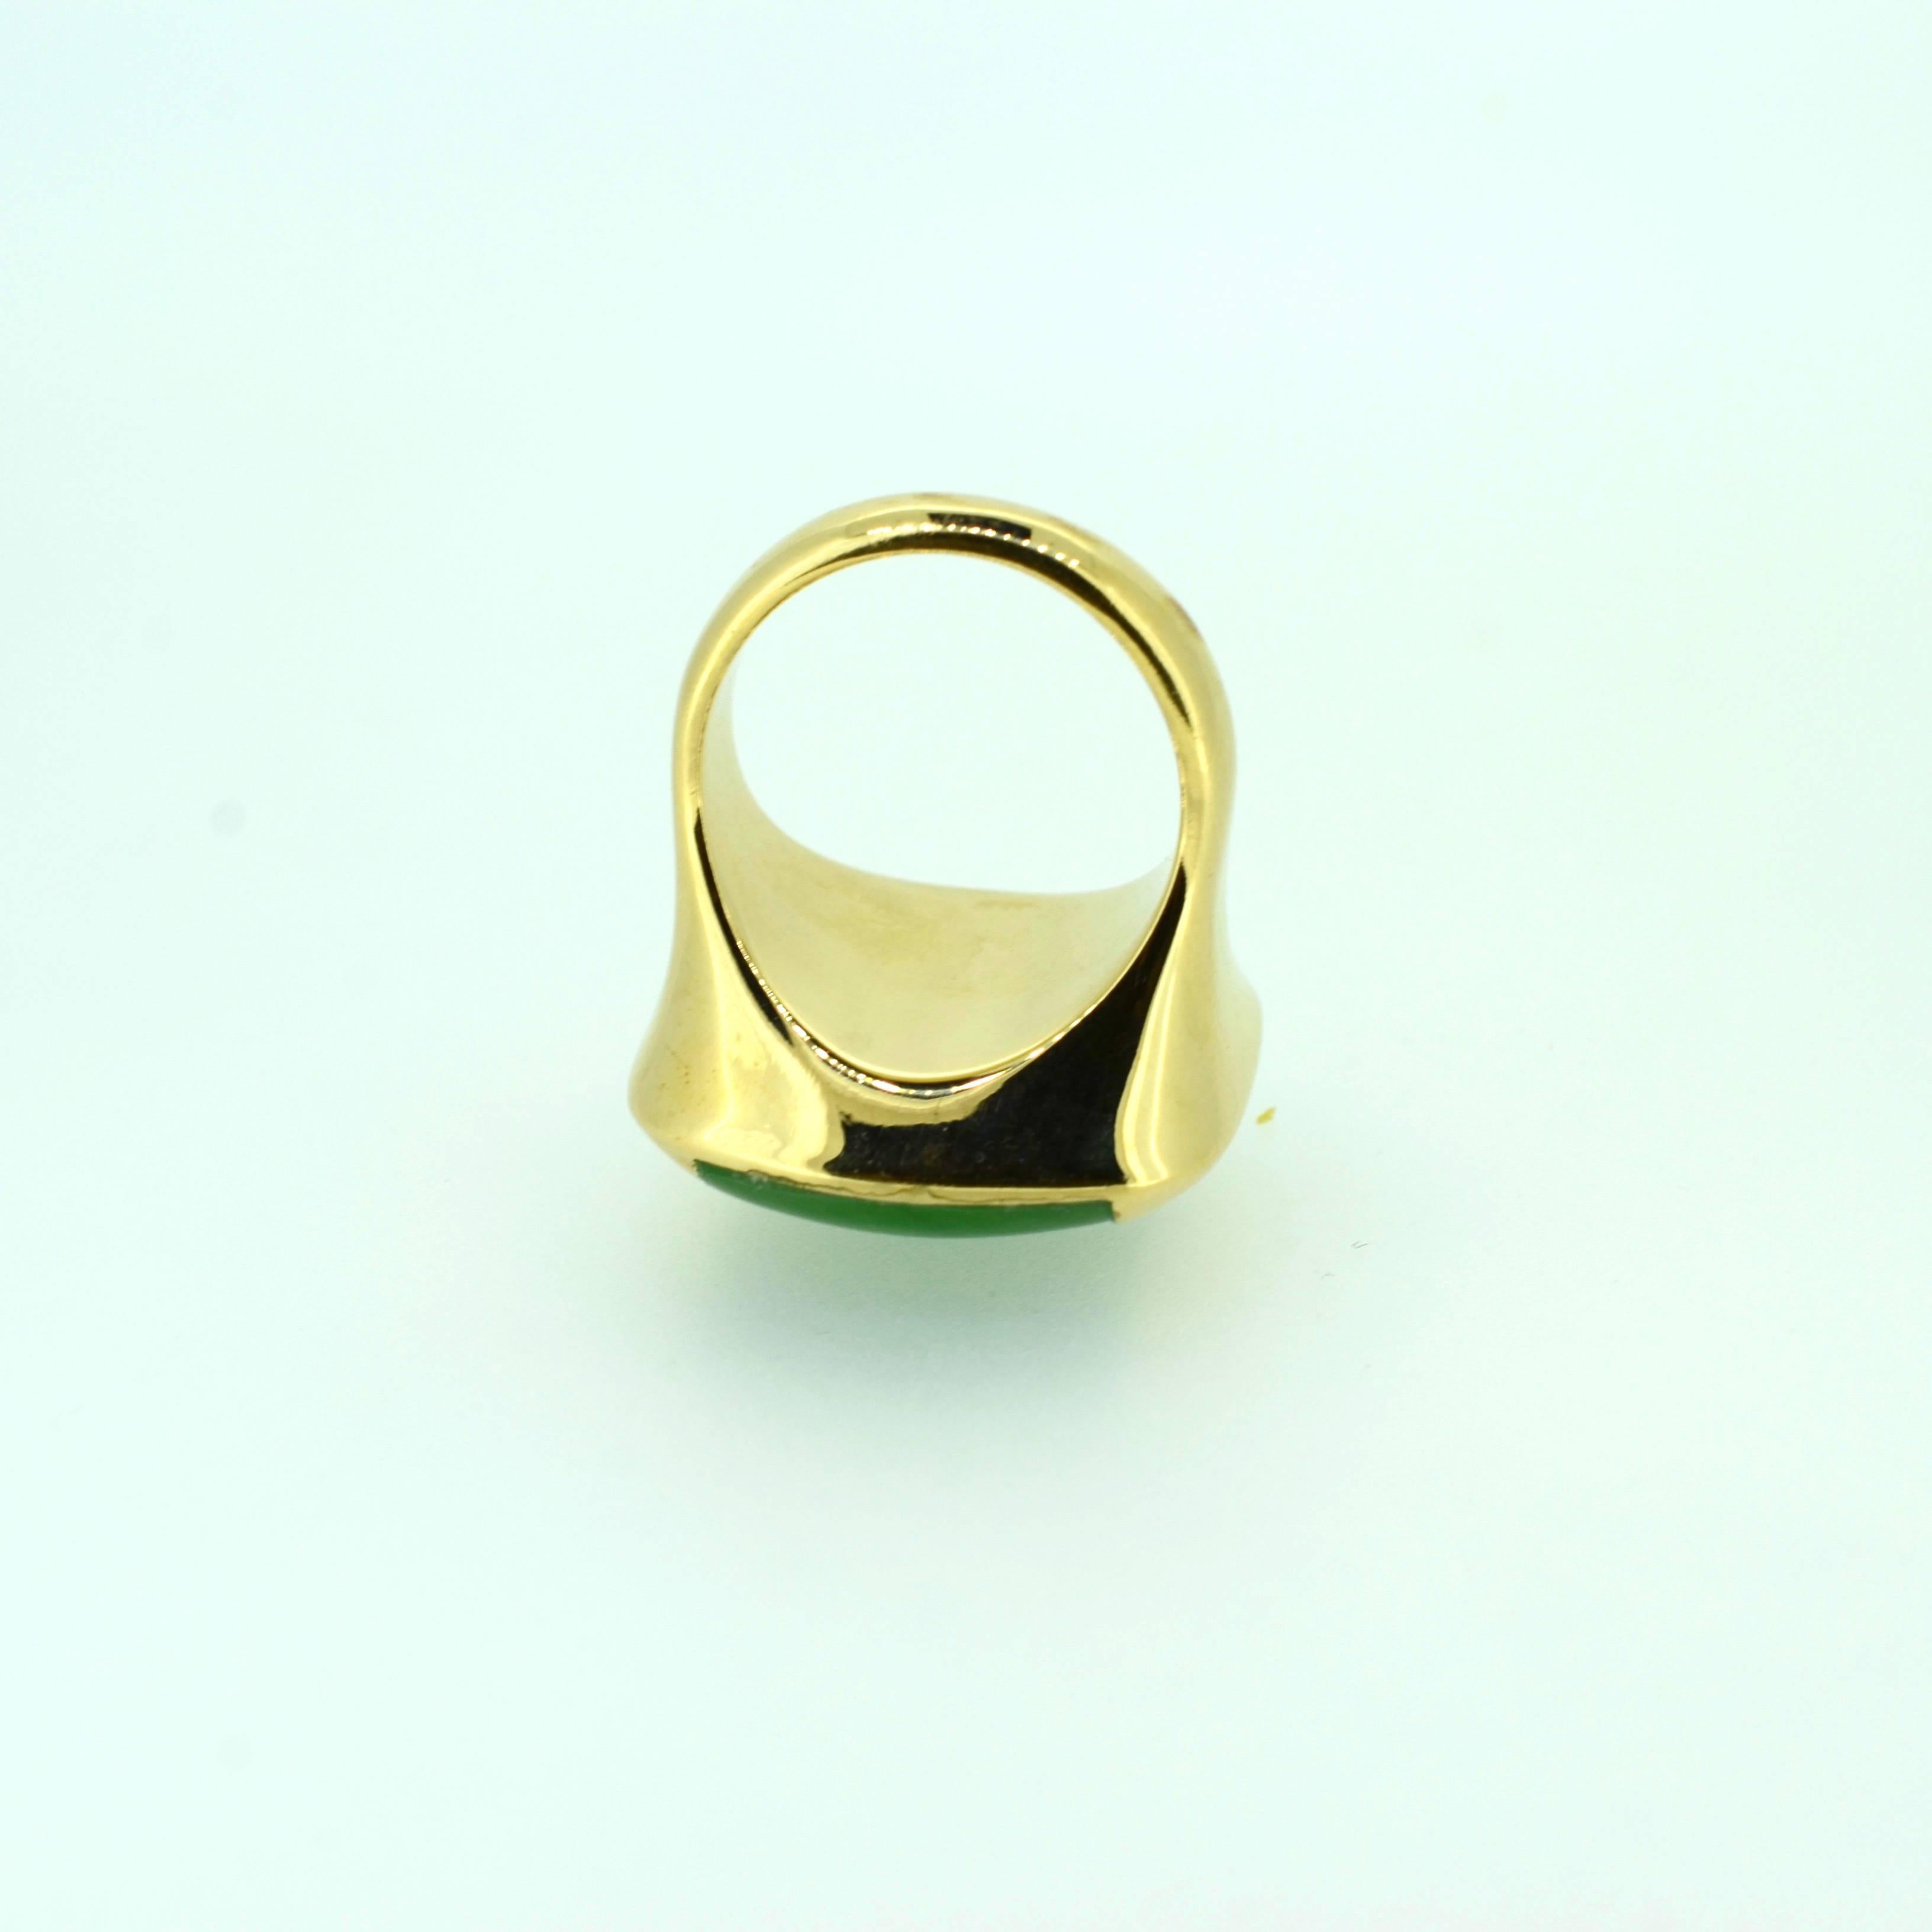 Jadeite 18kt yellow gold ring: Contemporary design, wax carved and cast in solid 18kt yellow gold base and shank. Jadeite is softly domed23X16mm soft rectangular shape and bezel set on the sides. Ring weighs 14.3 DWT.